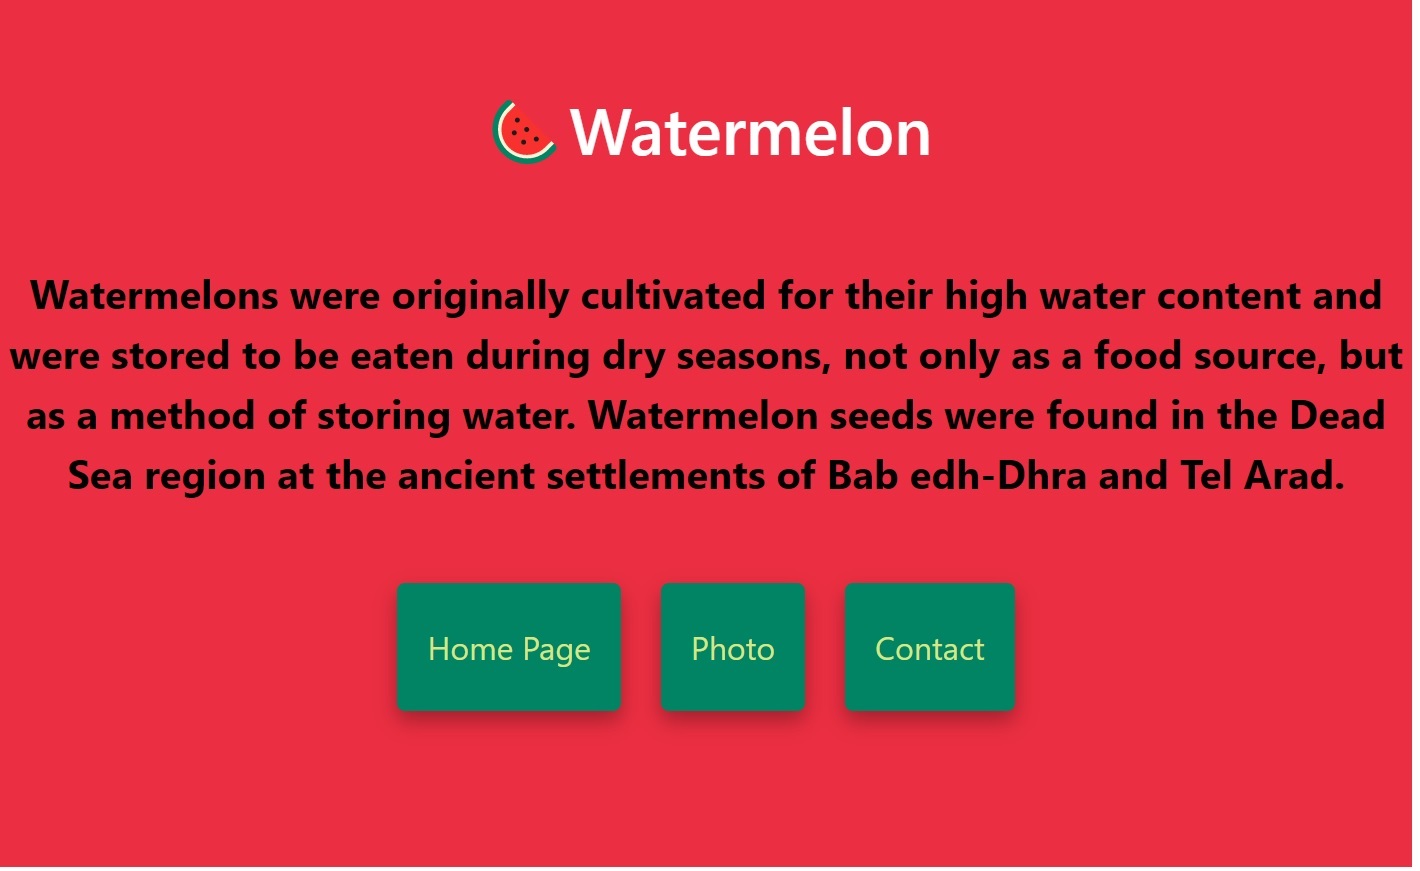 image of the watermelon page